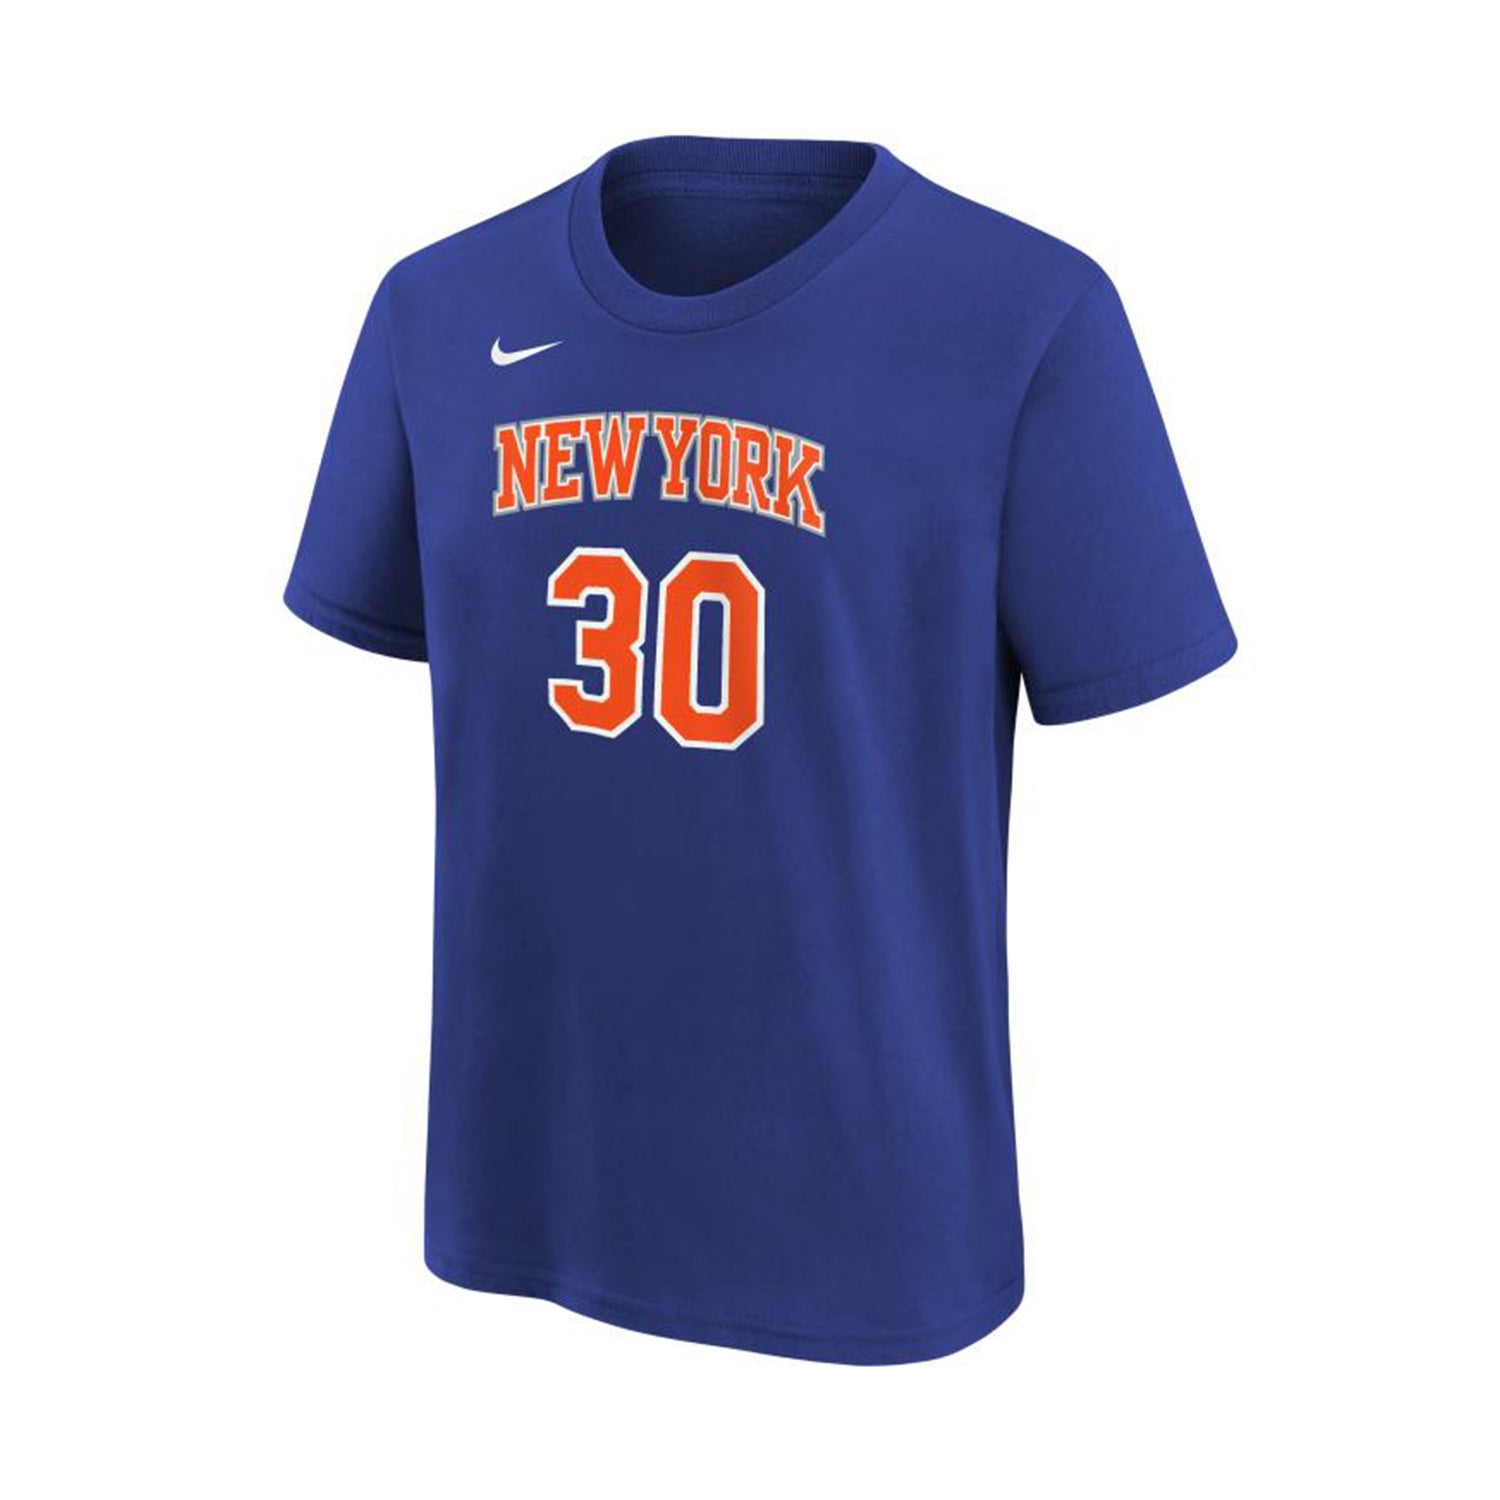 Youth Knicks Apparel  Shop Madison Square Garden